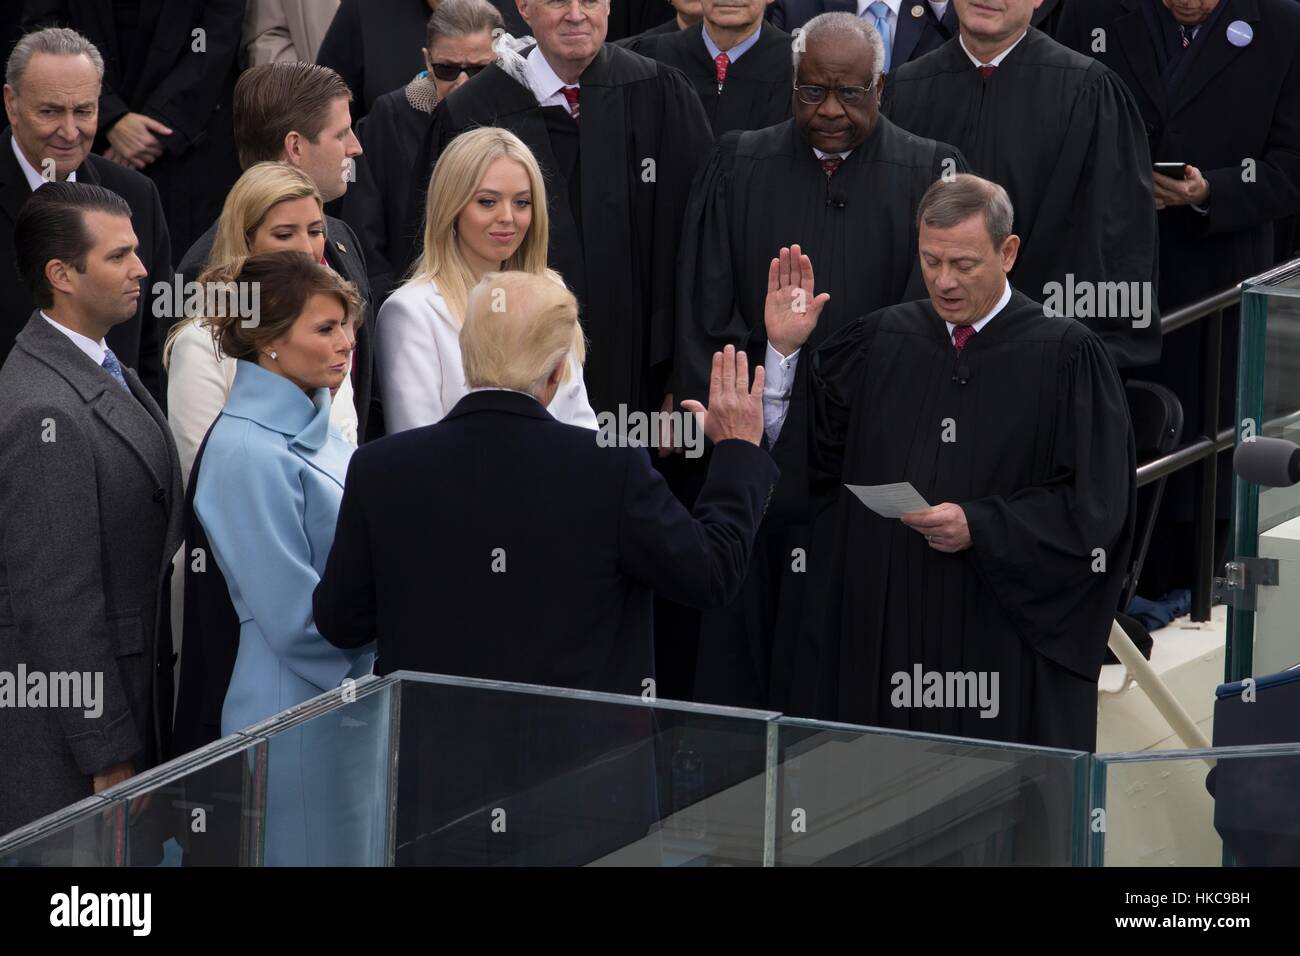 U.S. Supreme Court Chief Justice John Roberts administers the oath of office to President-elect Donald Trump during the 58th Presidential Inauguration at the U.S. Capitol Building January 20, 2017 in Washington, DC. Stock Photo